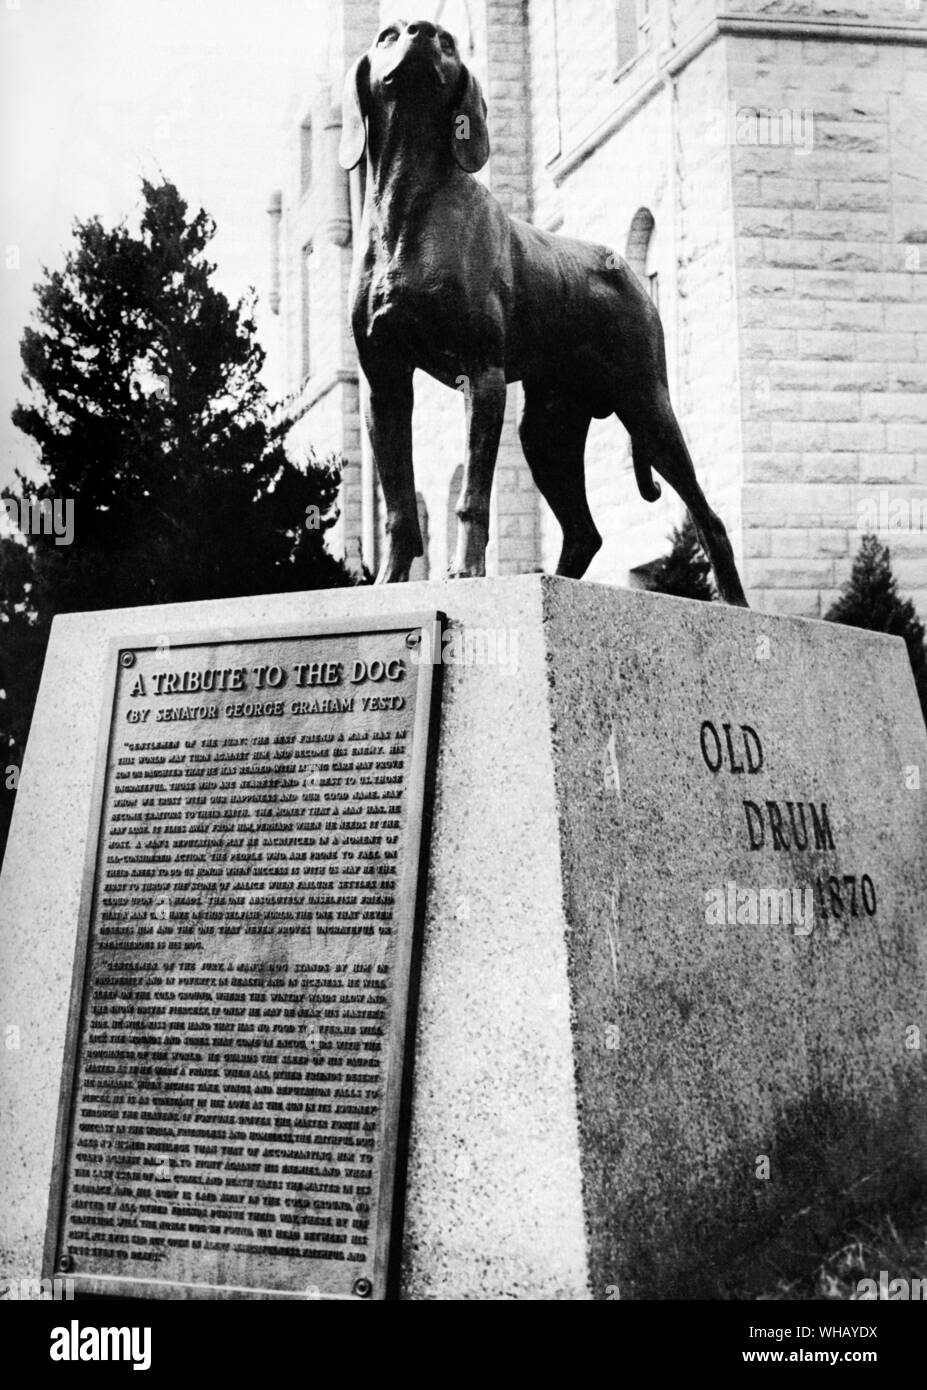 The famous dog monument in Missouri America, erected as a tribute to Old Drum by Senator George Vest and inspired by the dog's loyalty 1870 Stock Photo